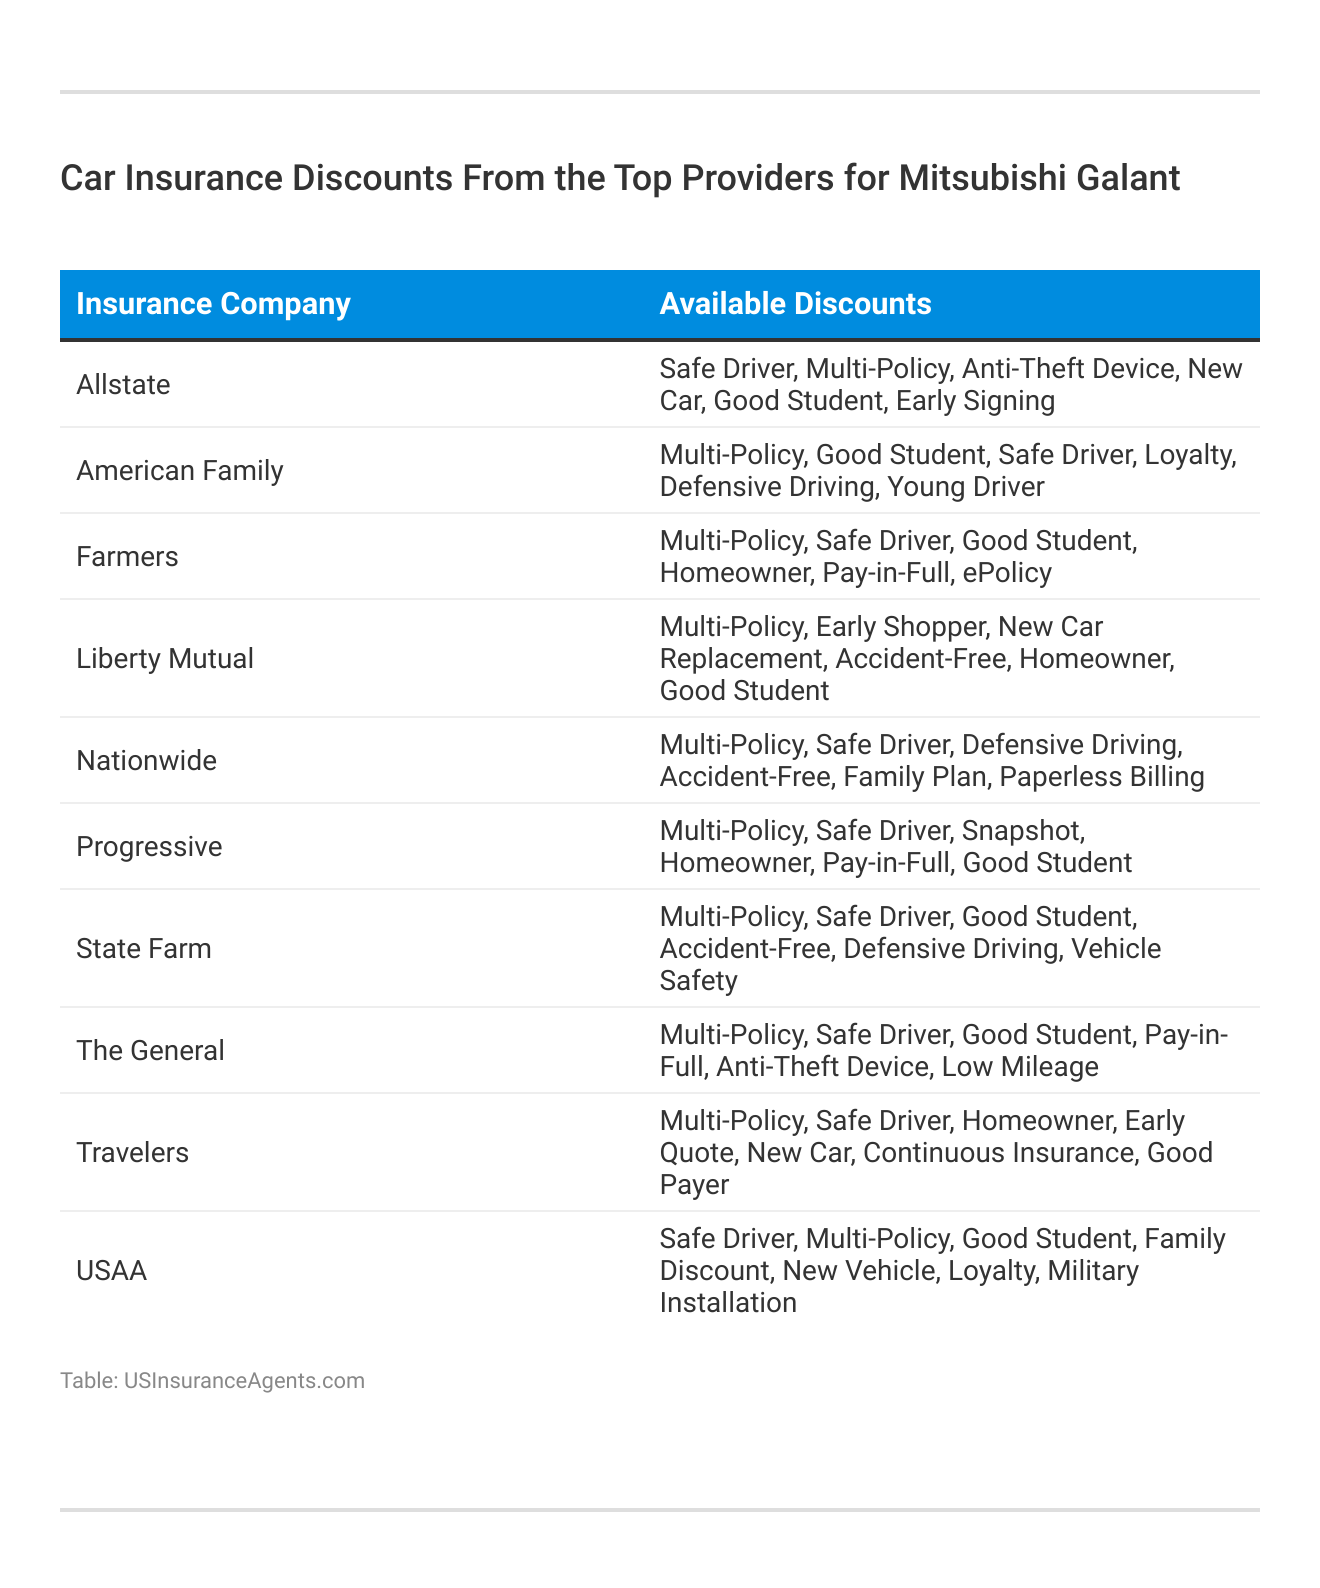 <h3>Car Insurance Discounts From the Top Providers for Mitsubishi Galant </h3>